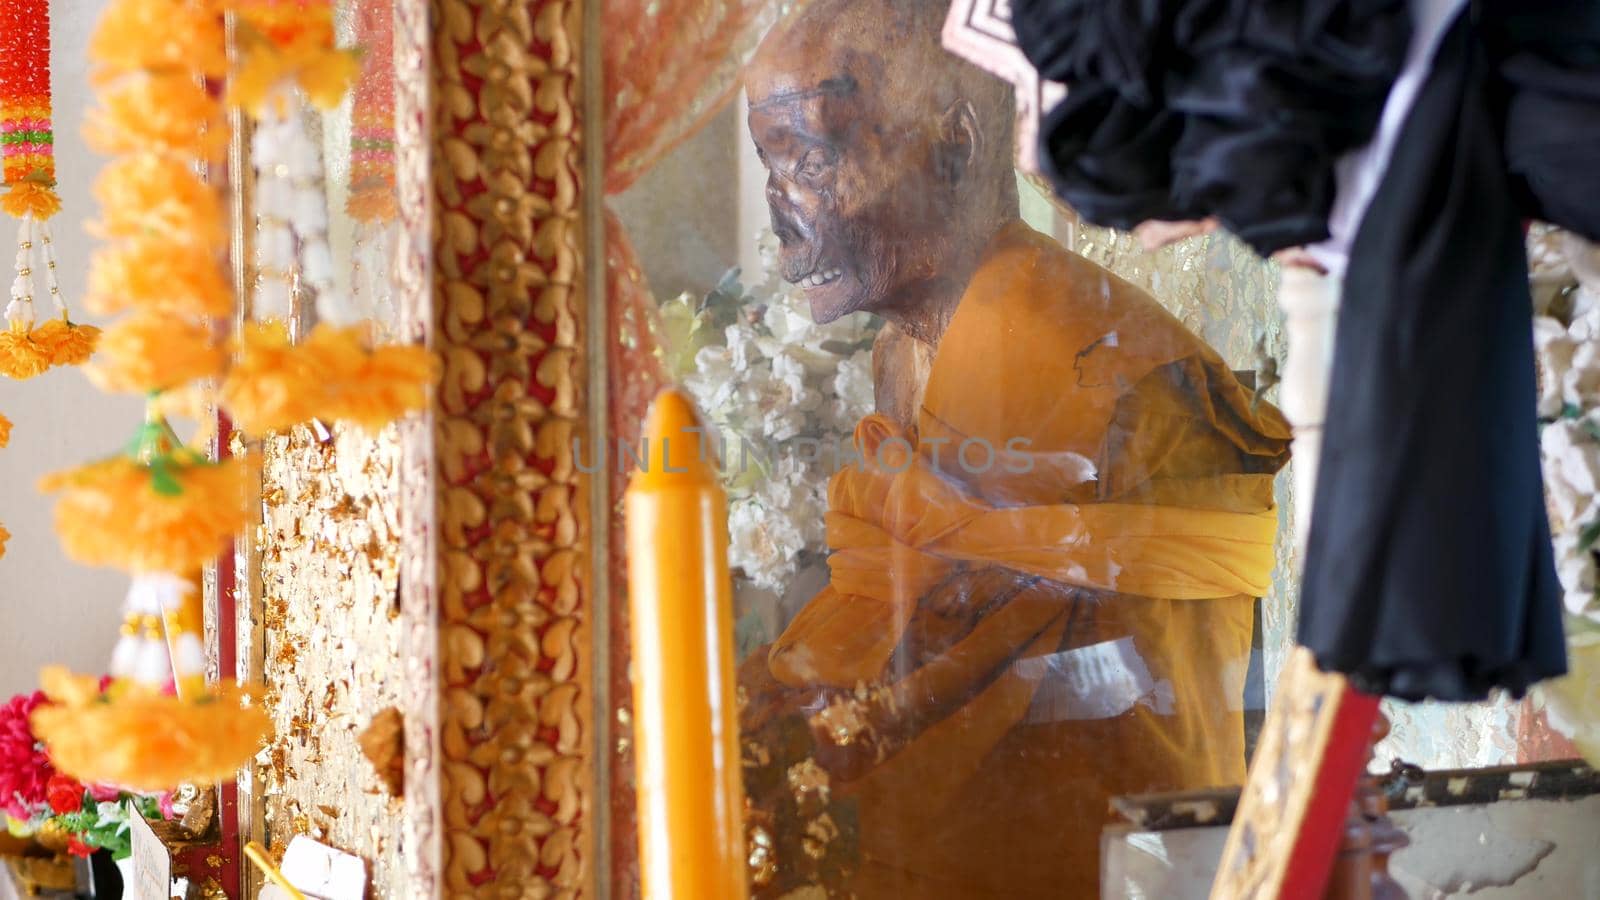 KOH SAMUI ISLAND, THAILAND - 17 JULY 2019: Wat Khiri Wongkaram Buddhist Temple. The mummified body of monk and gold leaf. Exotic tradition of storing the relics of saints who died during meditation. by DogoraSun